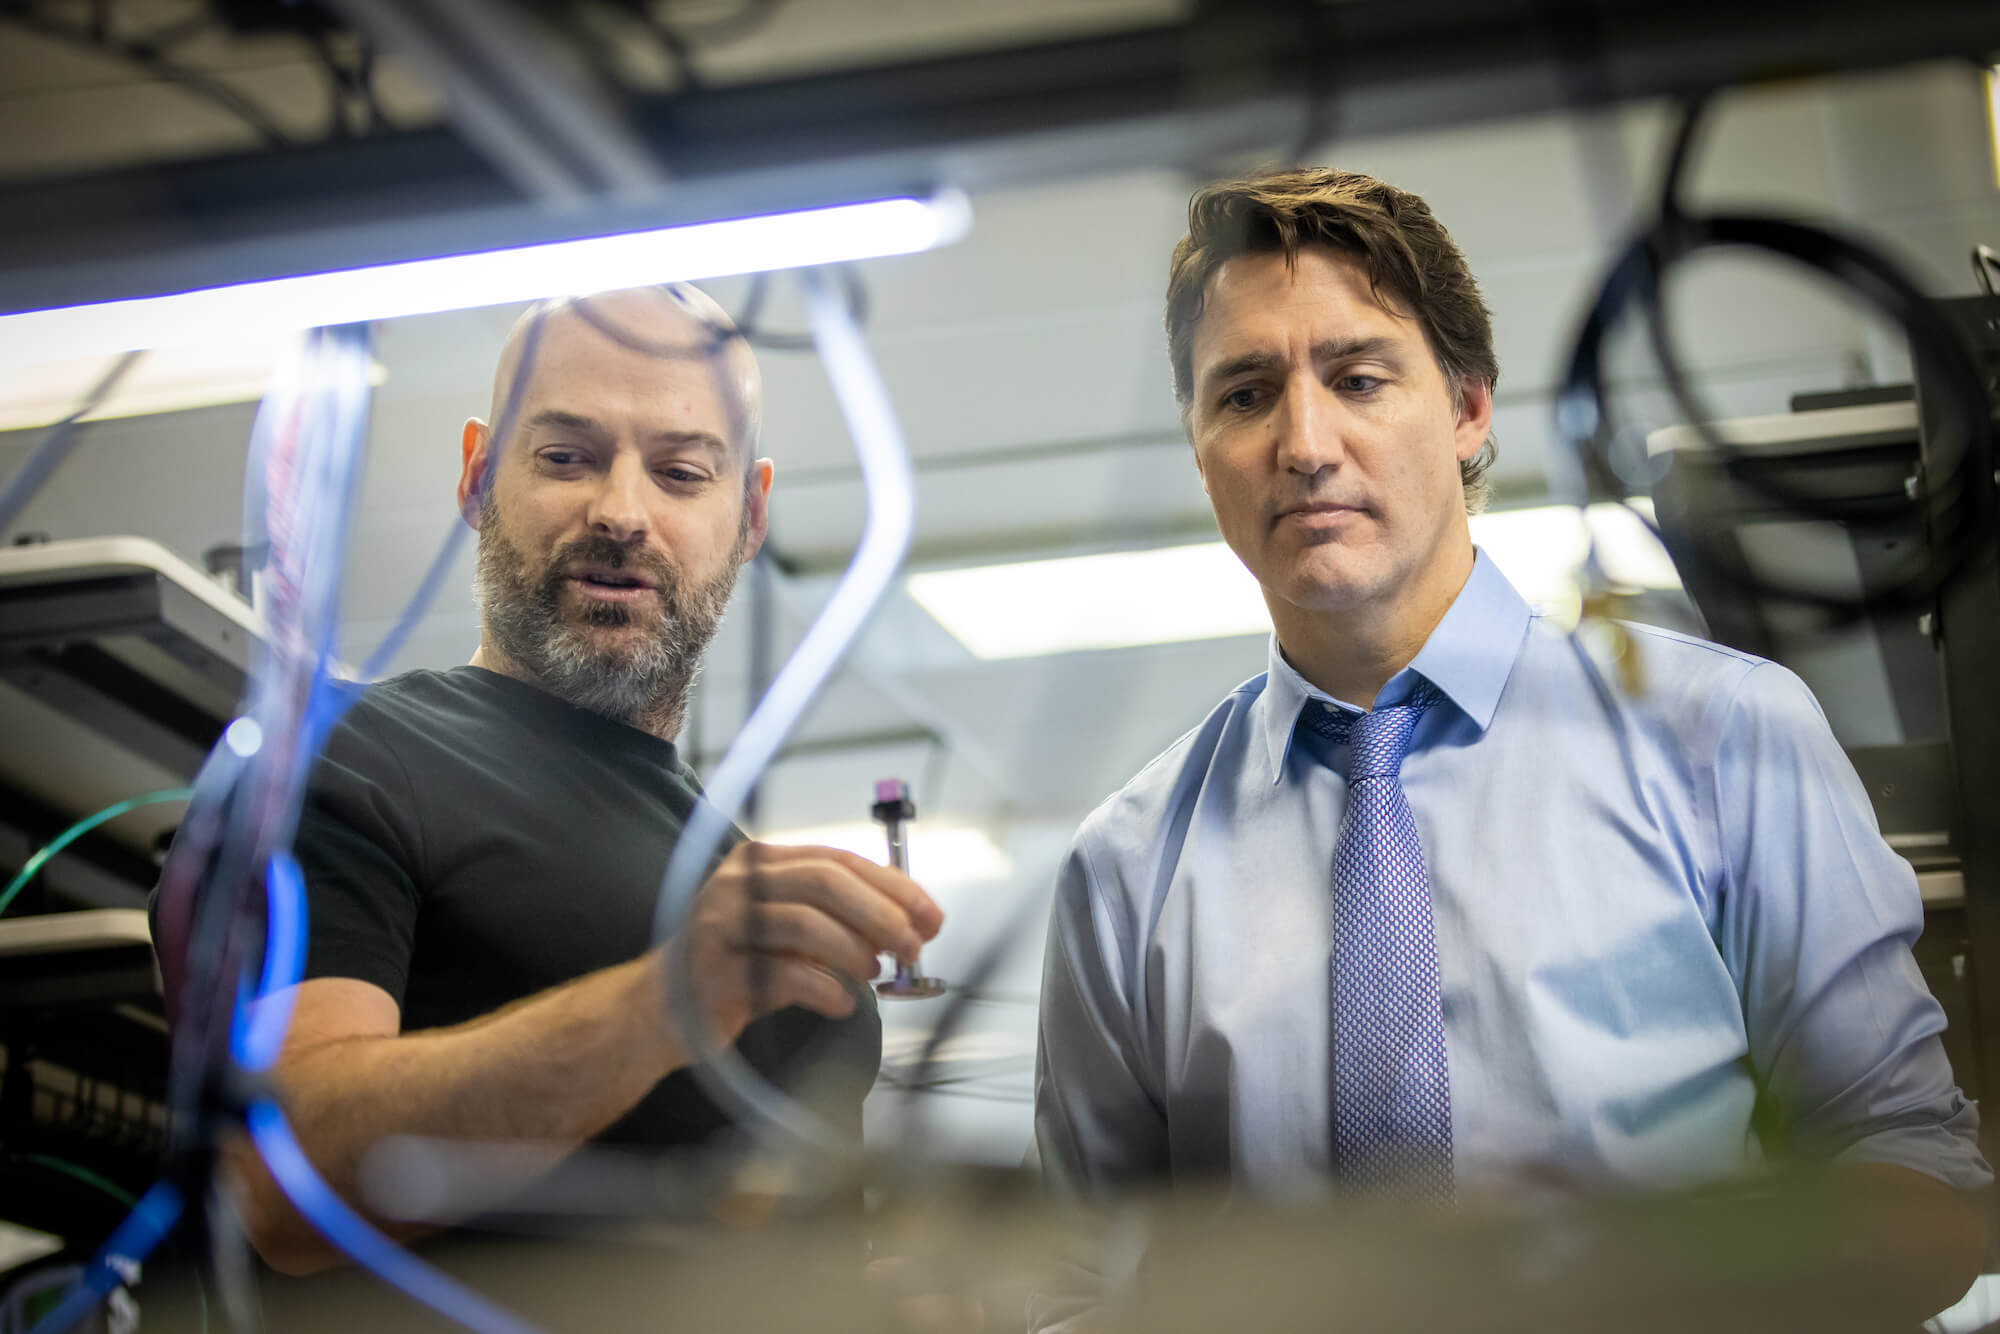 Christian Weedbrook, CEO & Founder, Xanadu with Justin Trudeau, Prime Minister of Canada